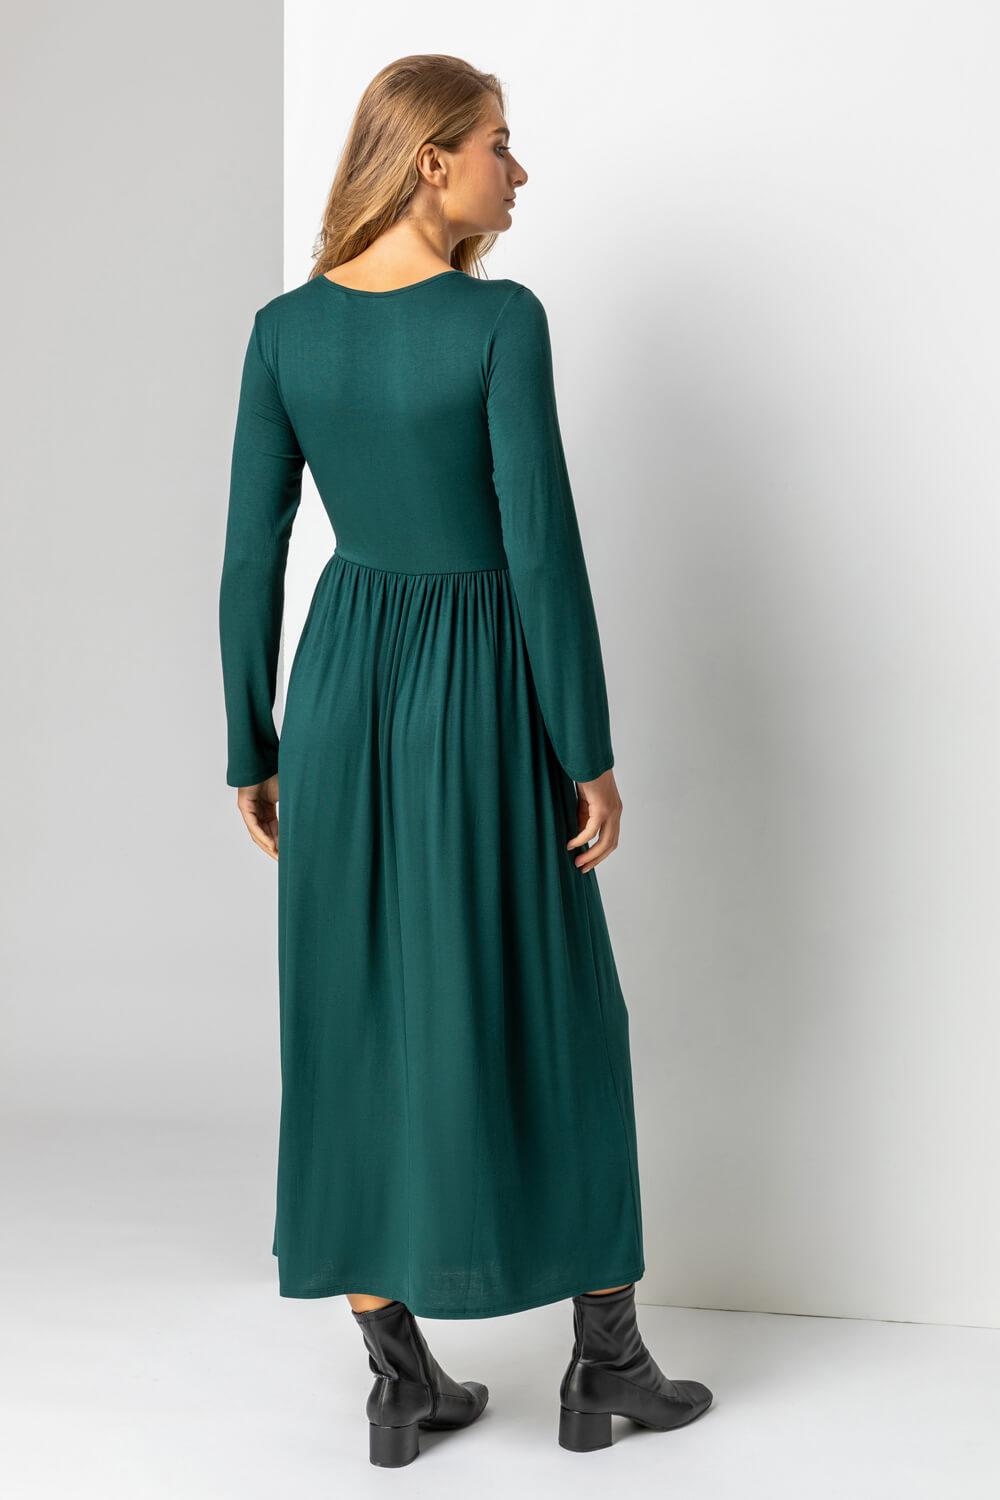 Forest  Long Sleeve Jersey Maxi Dress, Image 2 of 5